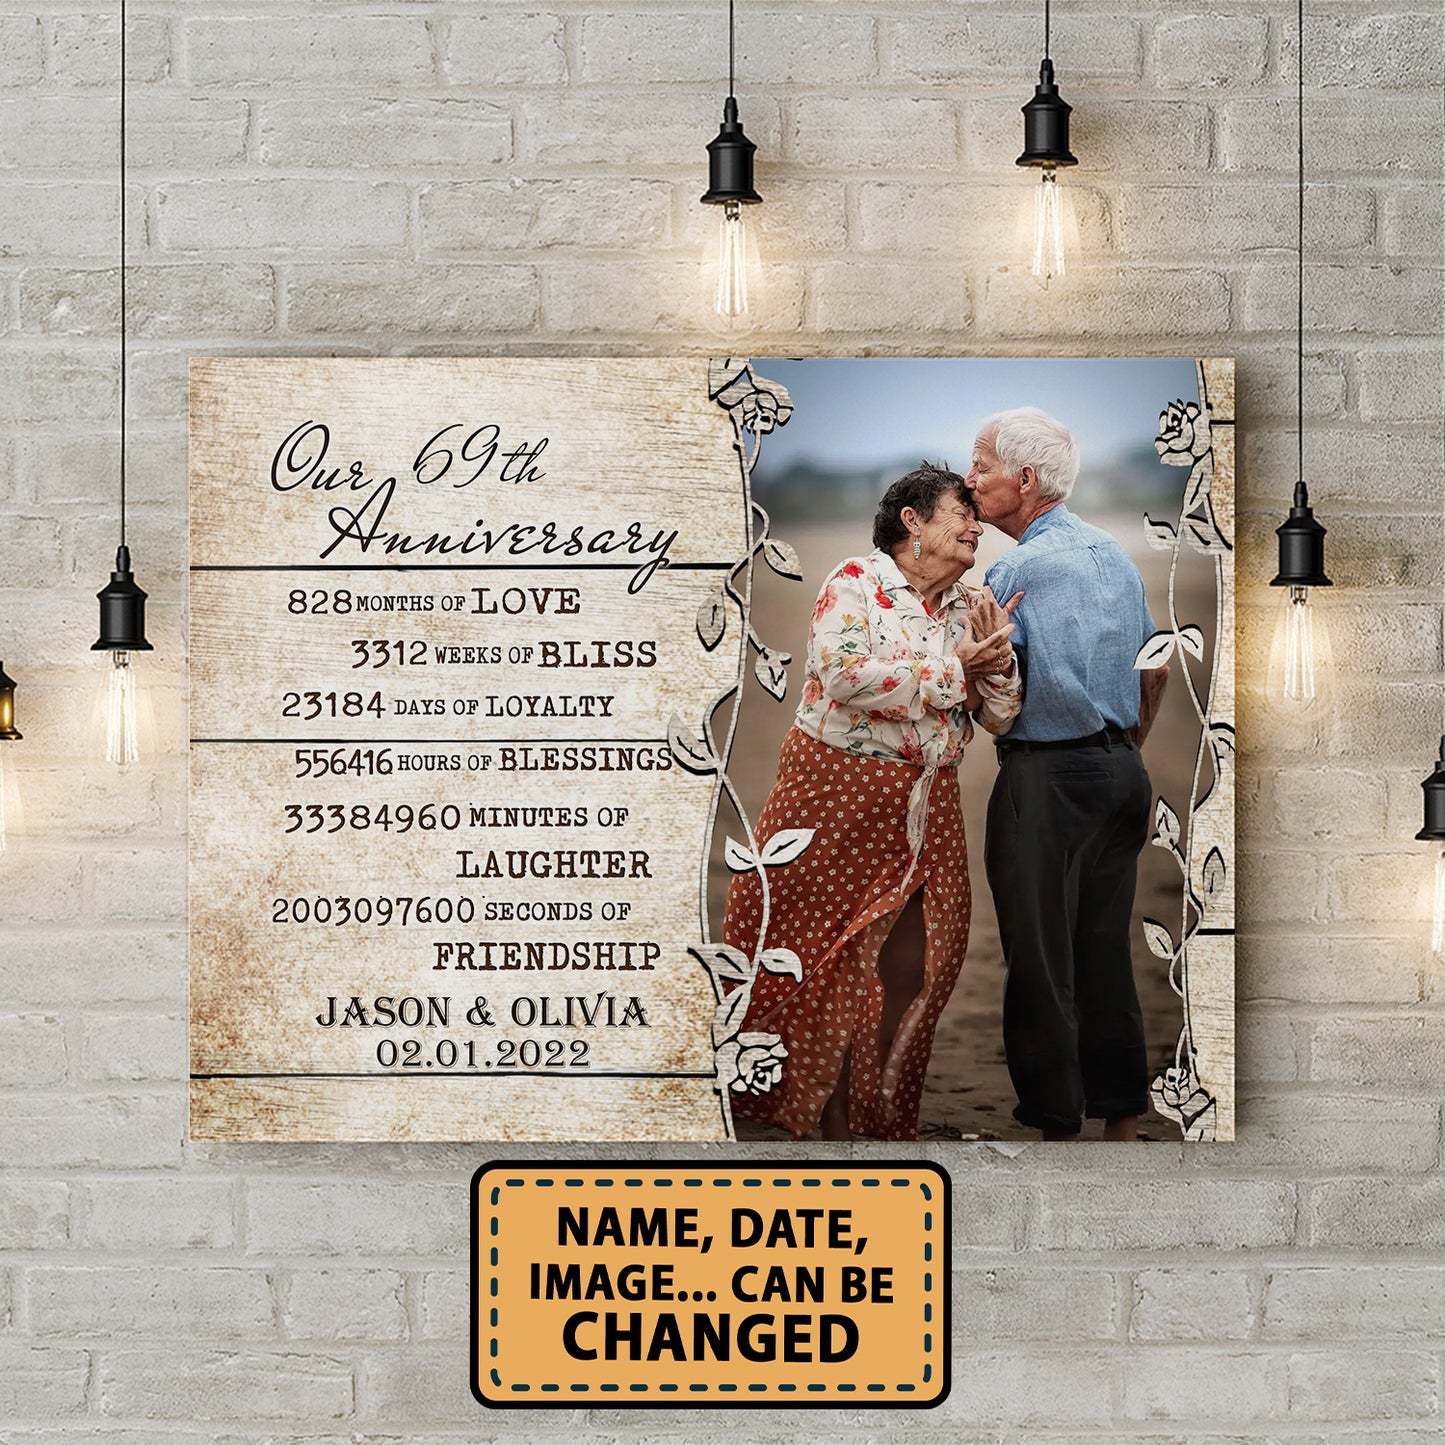 Our 69th Anniversary Timeless love Valentine Gift Personalized Canvas